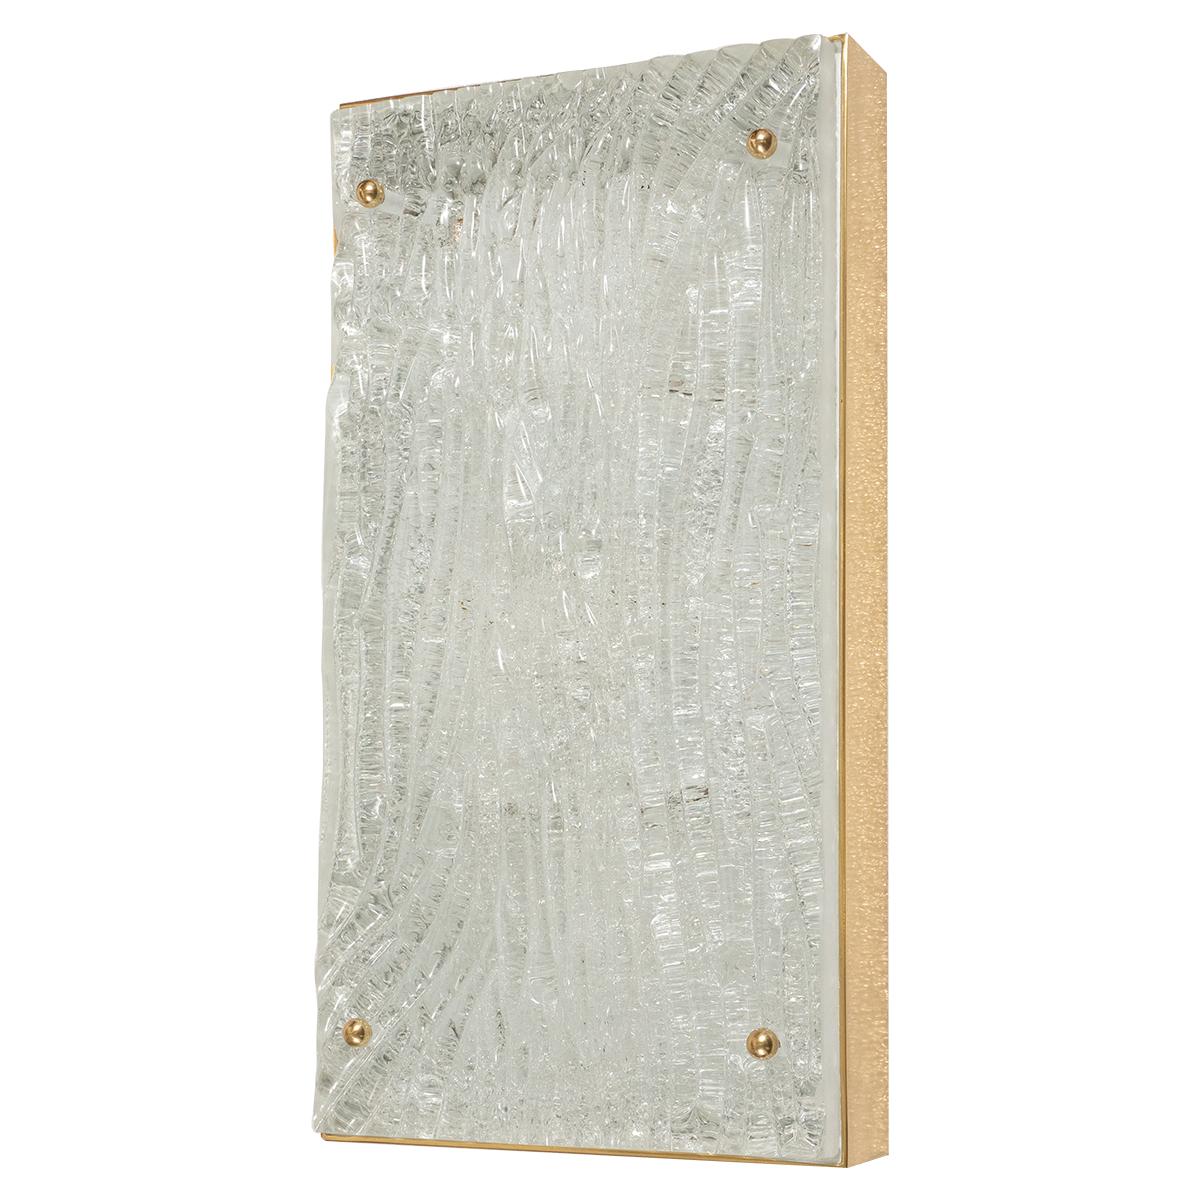 Wavy textured glass sconce in rectangular brass frame with ball finial details.